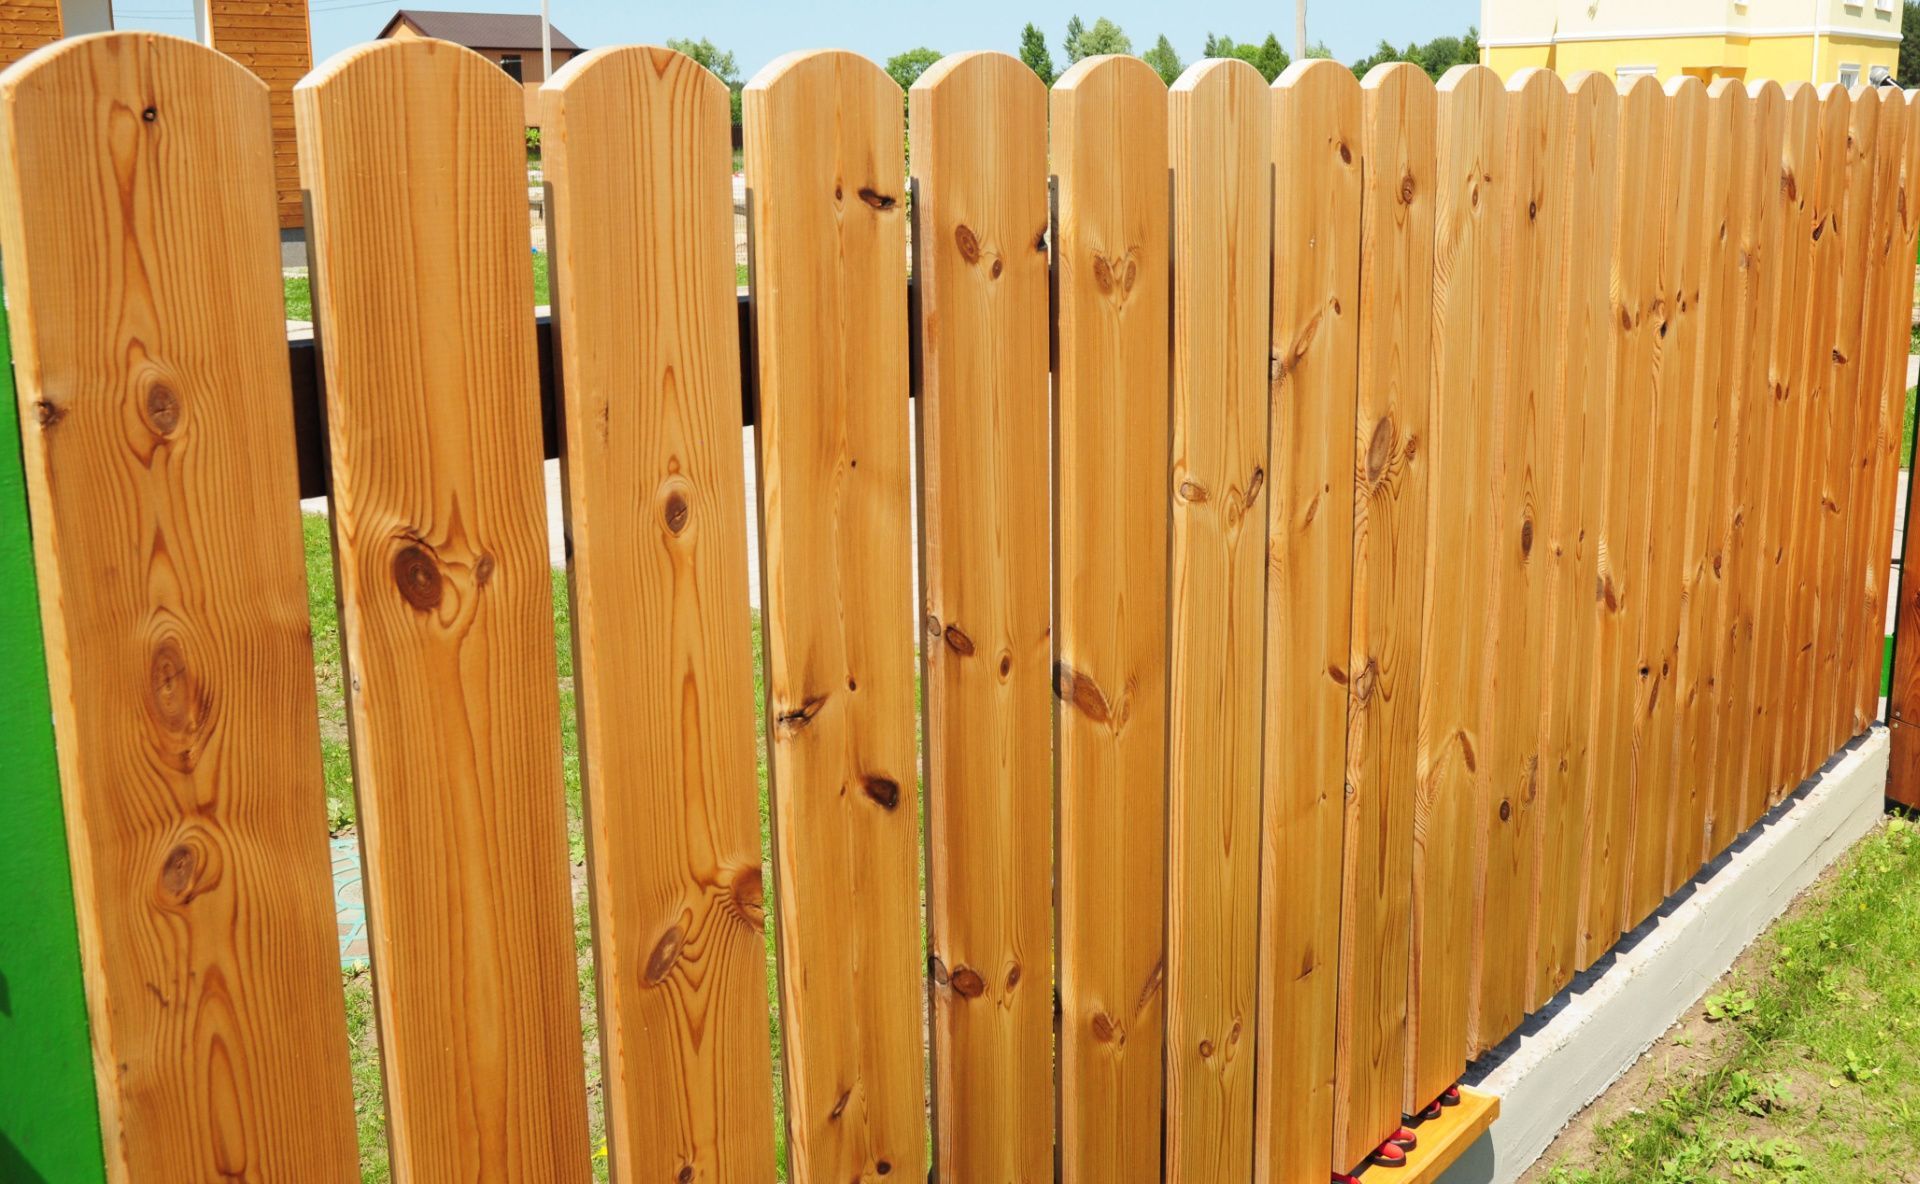 a close up of a wooden fence in a yard .